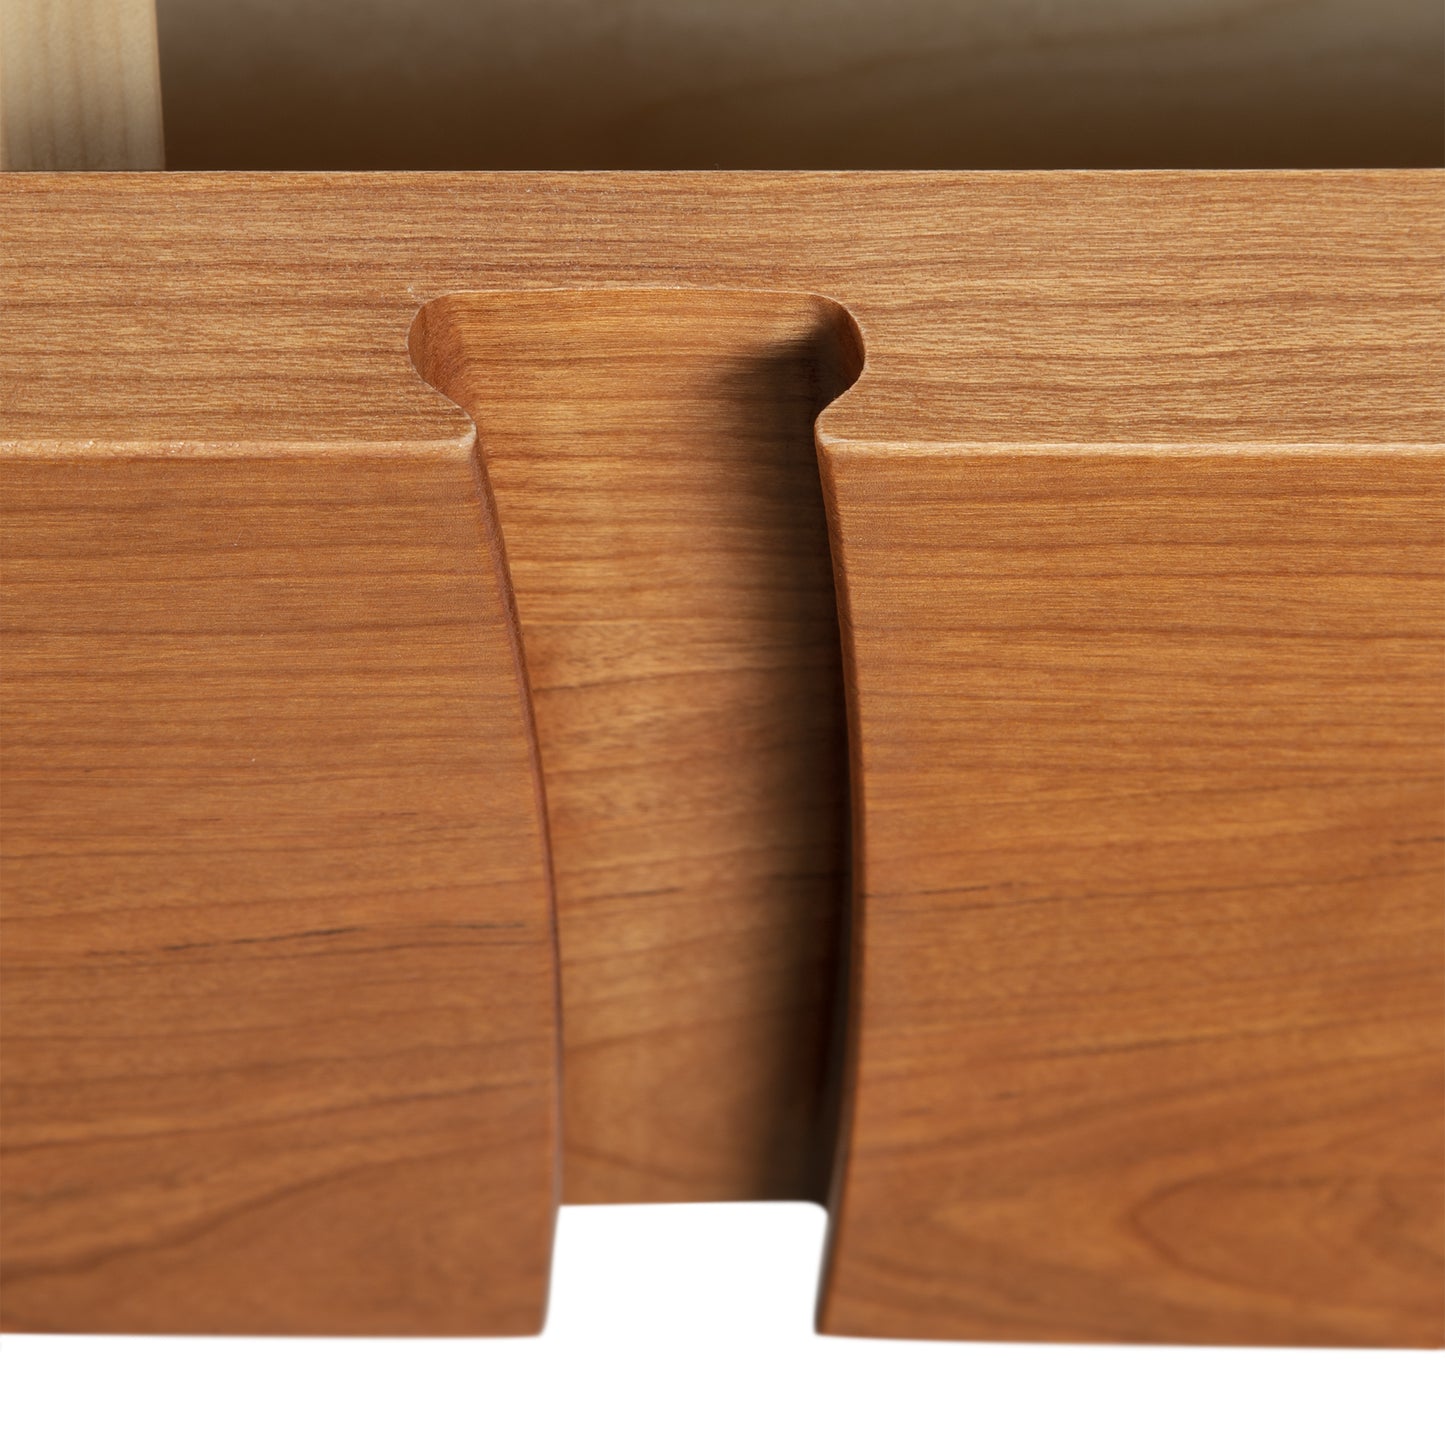 A close up view of a wooden drawer.